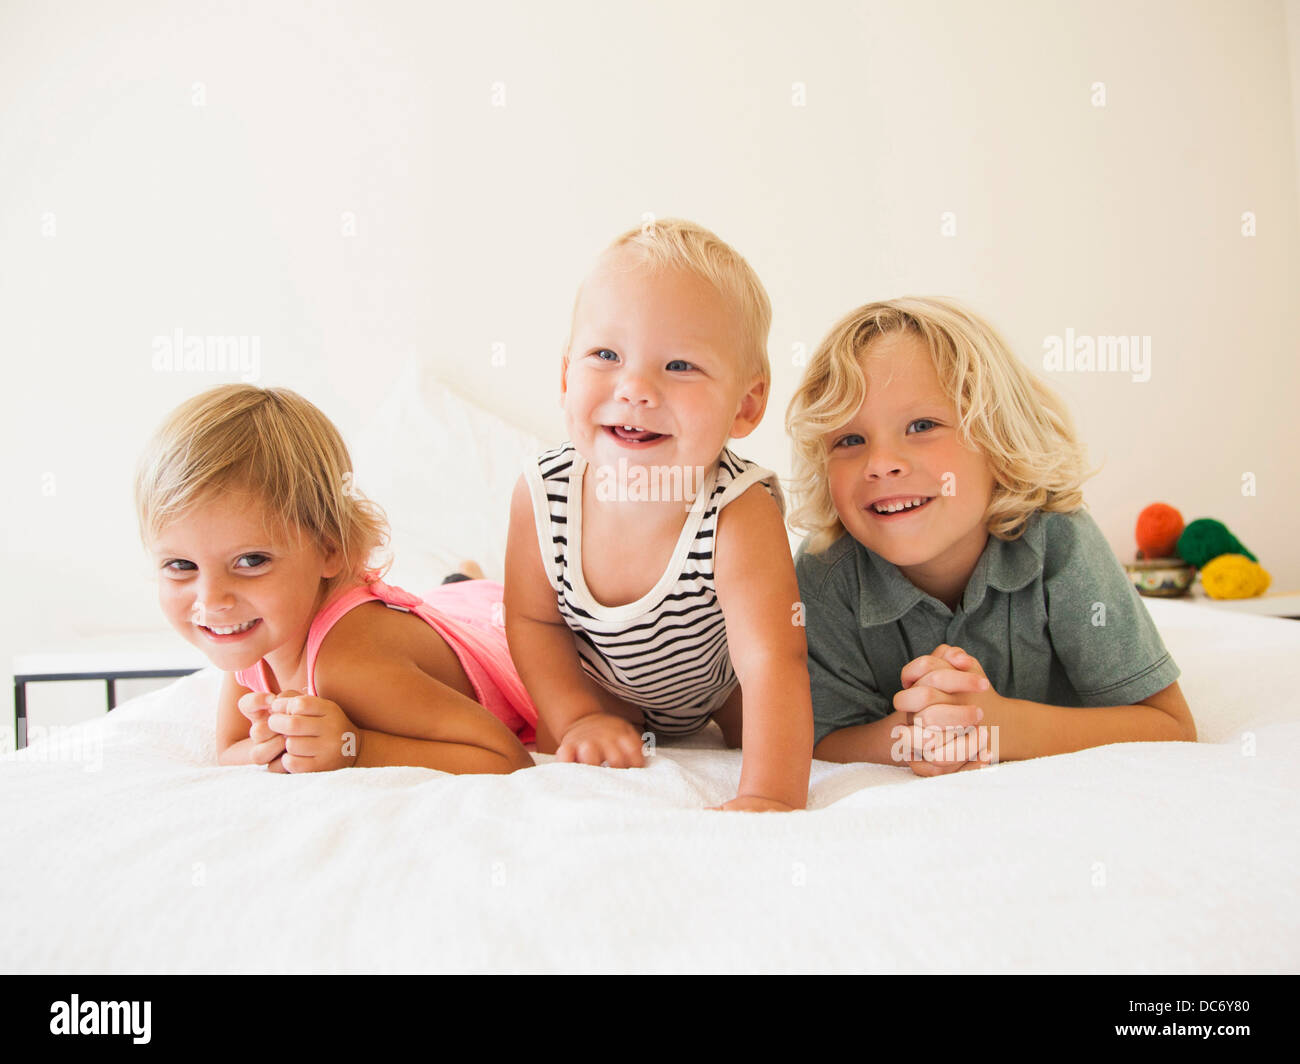 Portrait of boy (6-7), girl (2-3) and their baby brother (6-11 months) Stock Photo